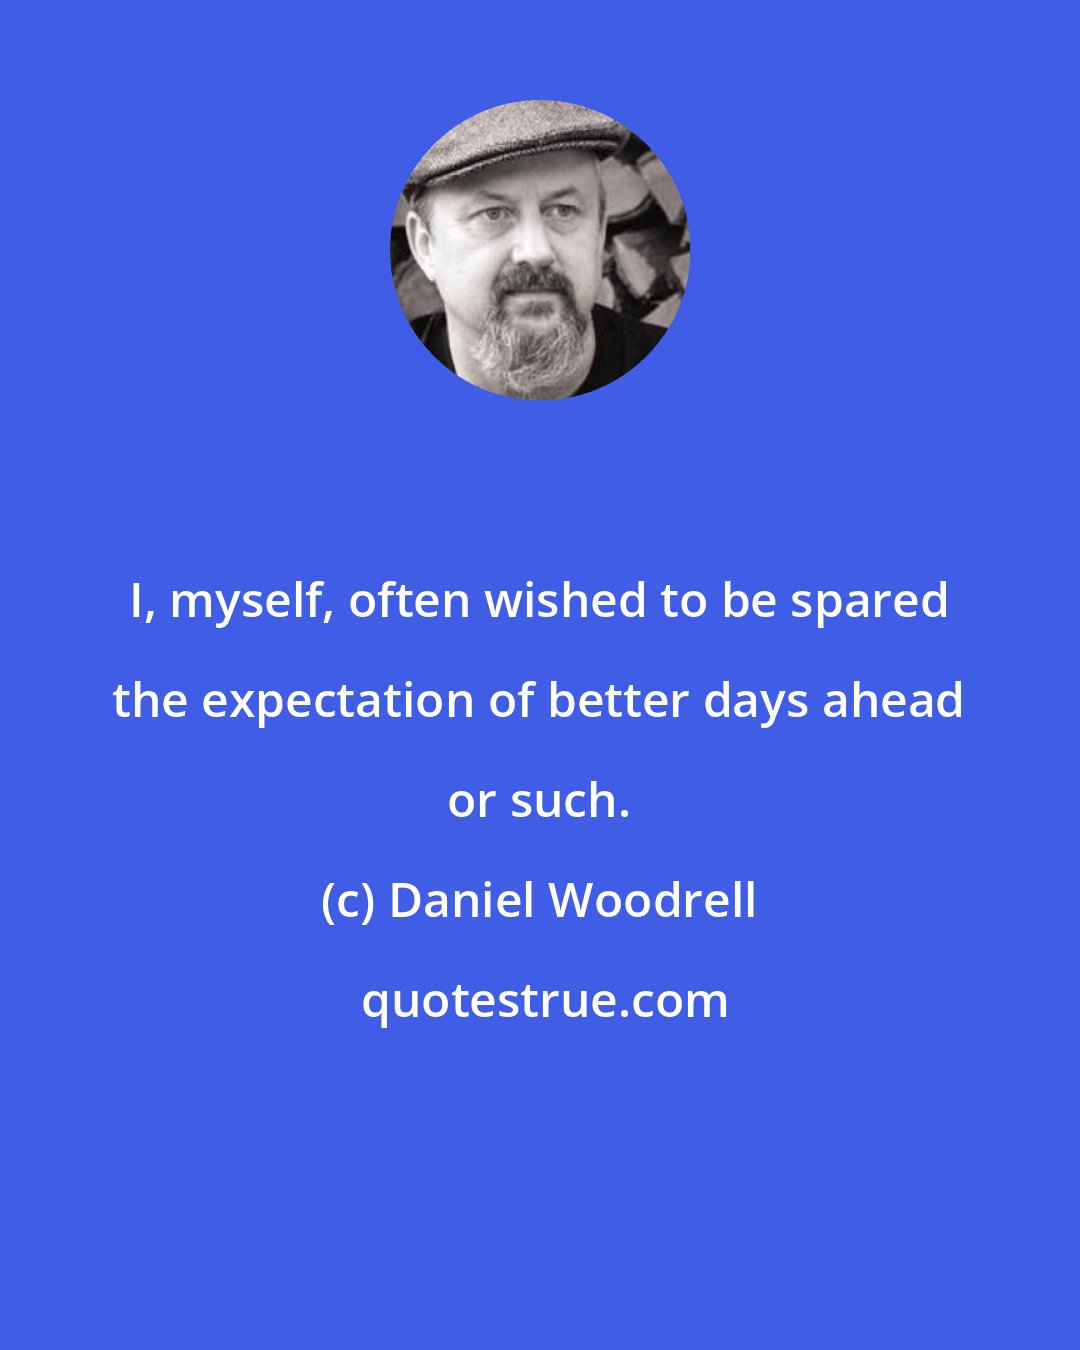 Daniel Woodrell: I, myself, often wished to be spared the expectation of better days ahead or such.